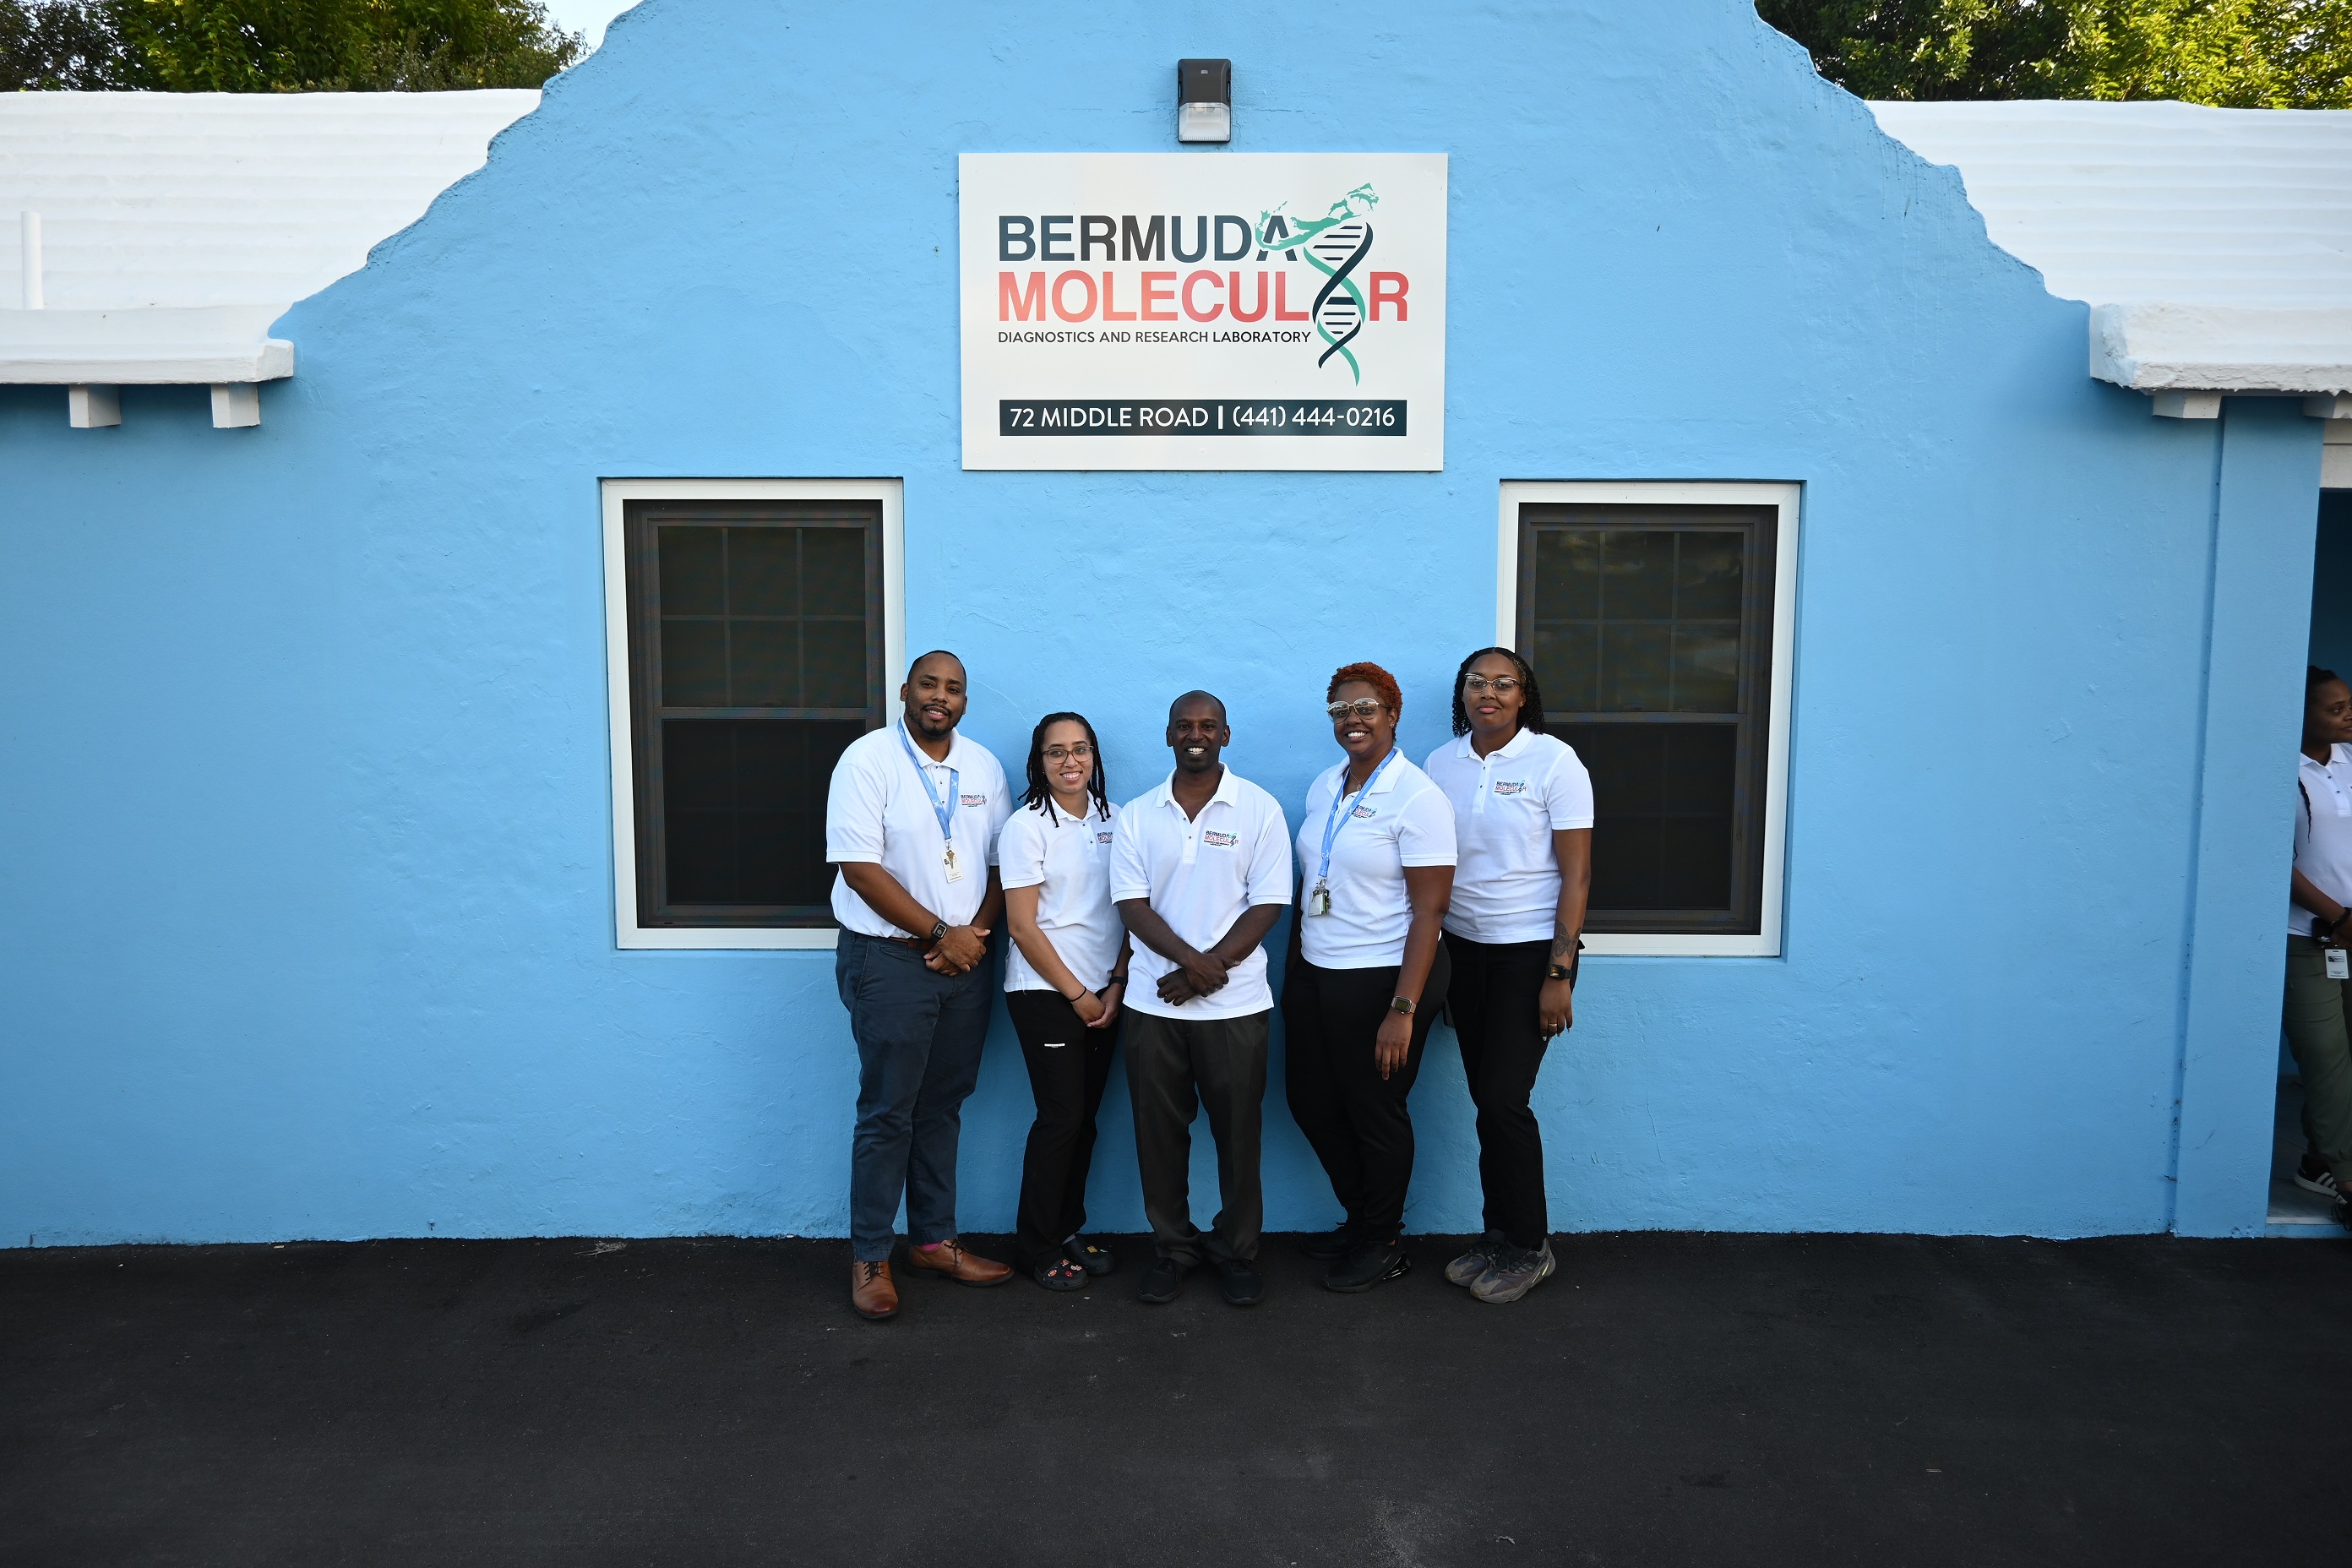 a group of people standing together in front of a blue building in Bermuda